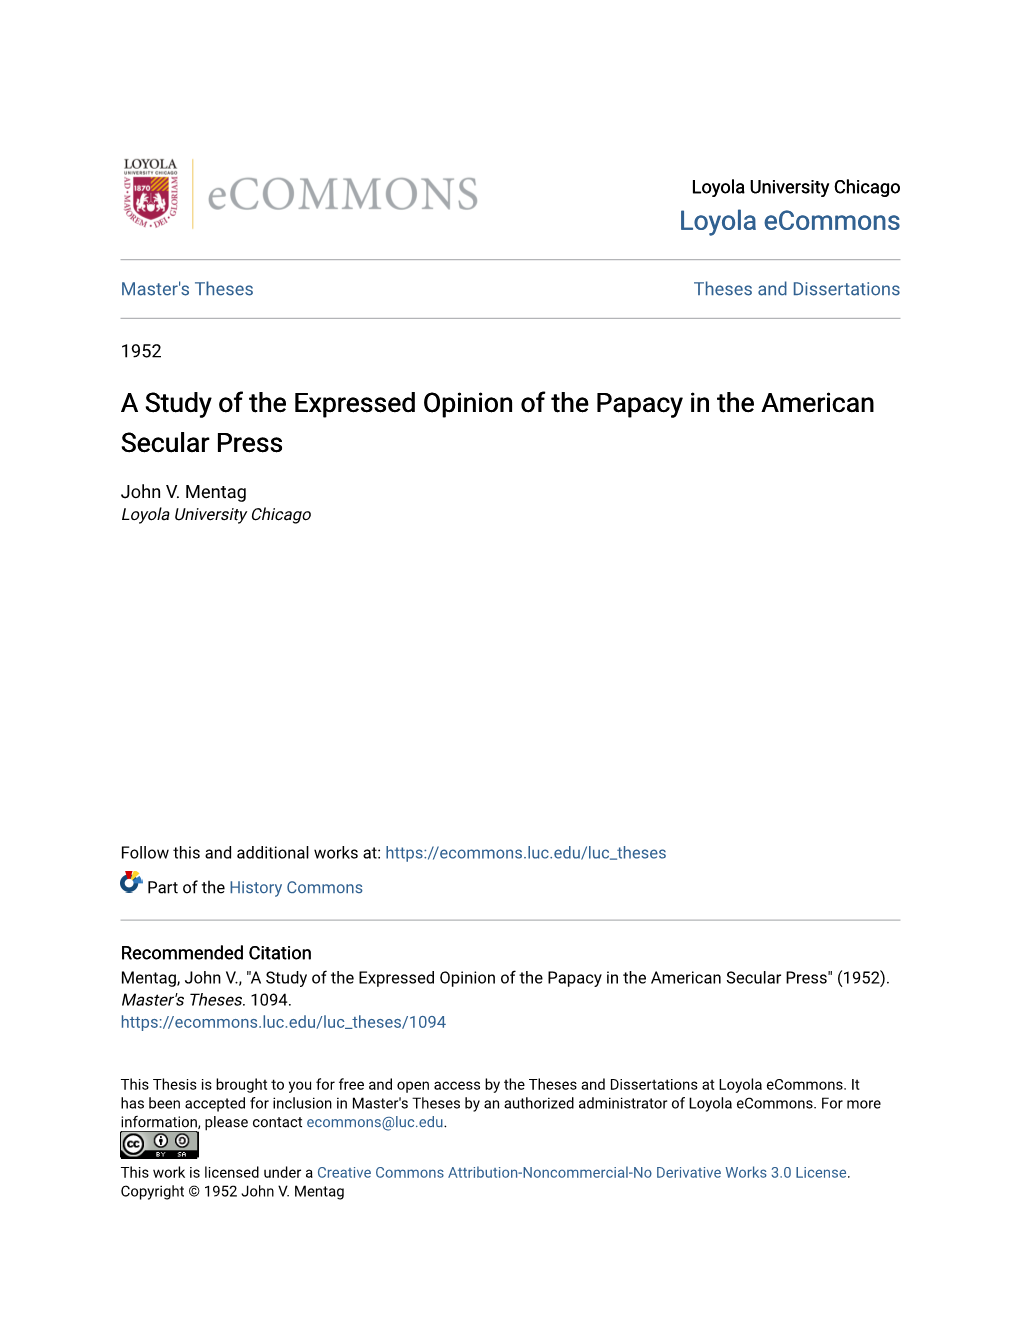 A Study of the Expressed Opinion of the Papacy in the American Secular Press